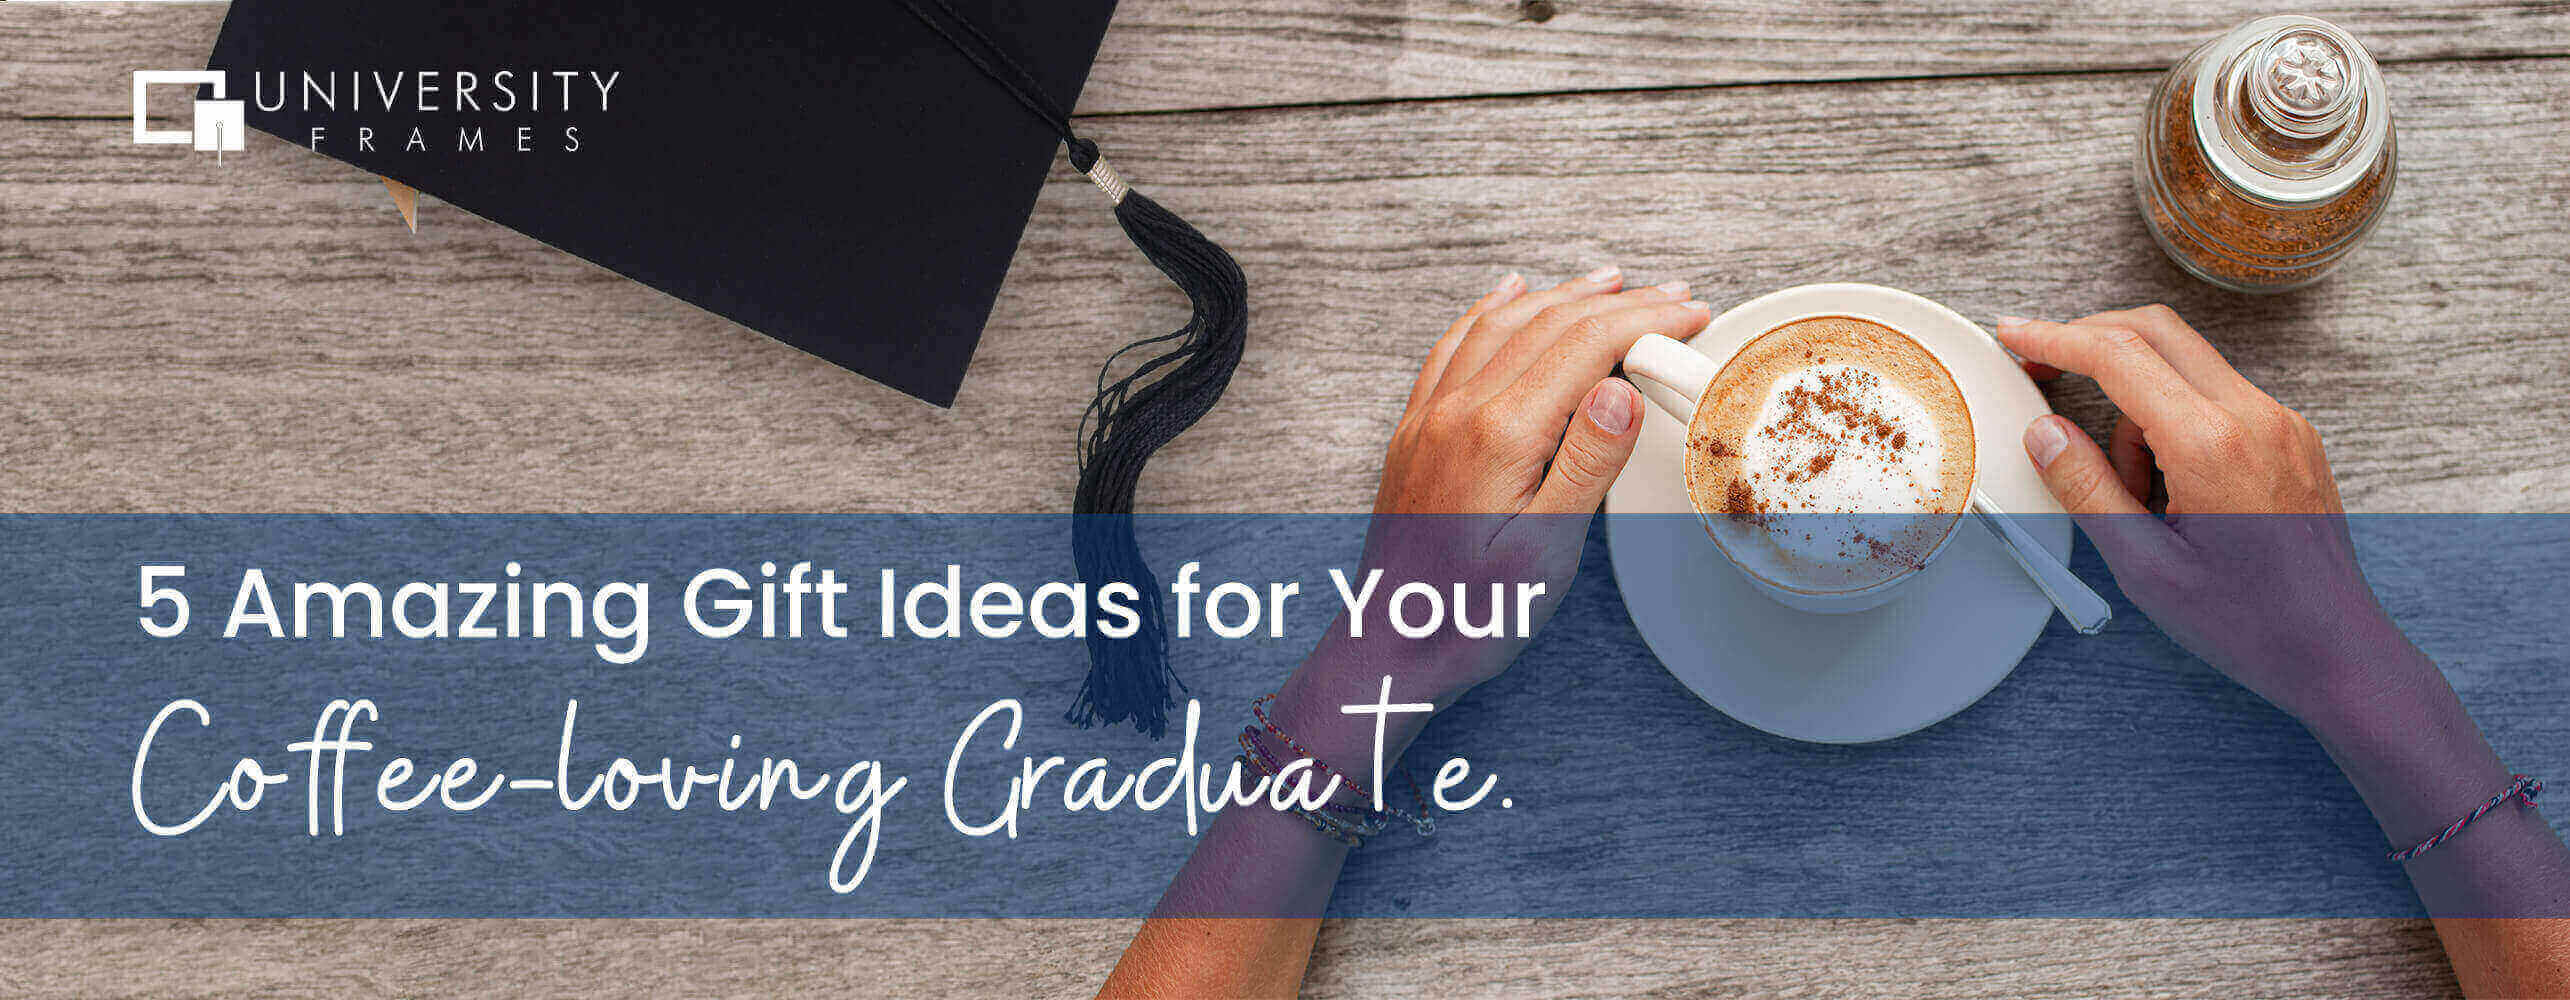 5 Amazing Gift Ideas for Your Coffee-loving Graduate